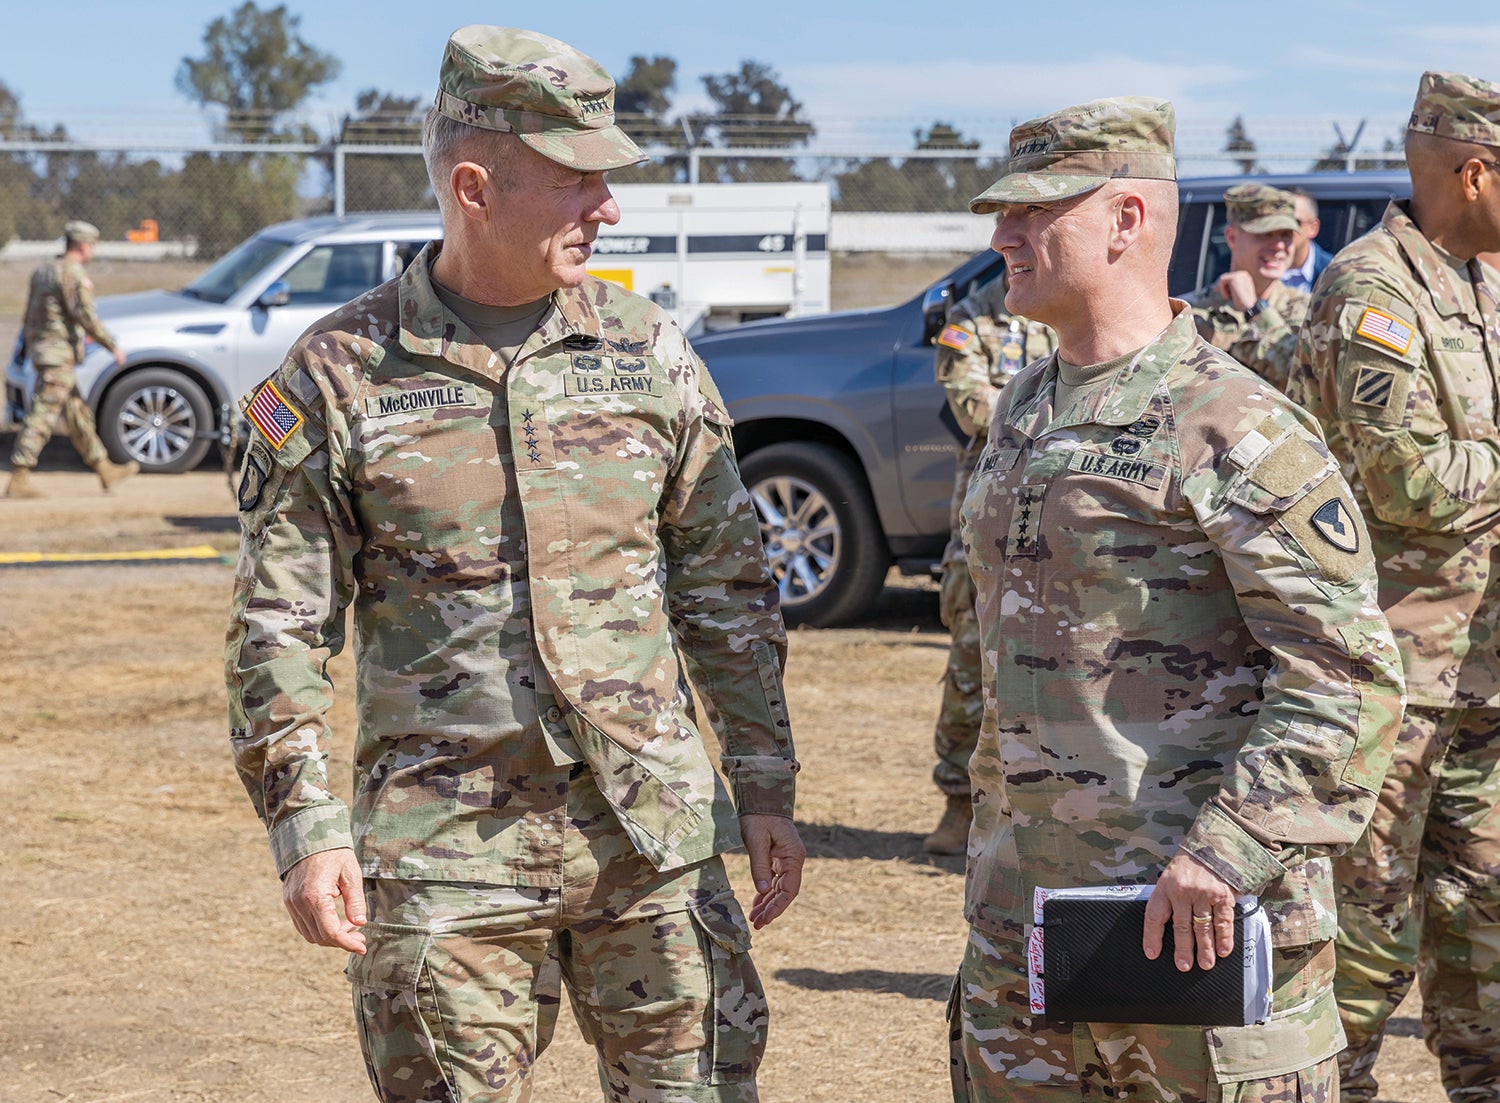 Army Chief of Staff Gen. James McConville, left, and Gen. Edward Daly, commander of the U.S. Army Materiel Command, speak during Project Convergence 2022 at Marine Corps Base Camp Pendleton, California. (Credit: U.S. Army//Sgt. 1st Class David Chapman)